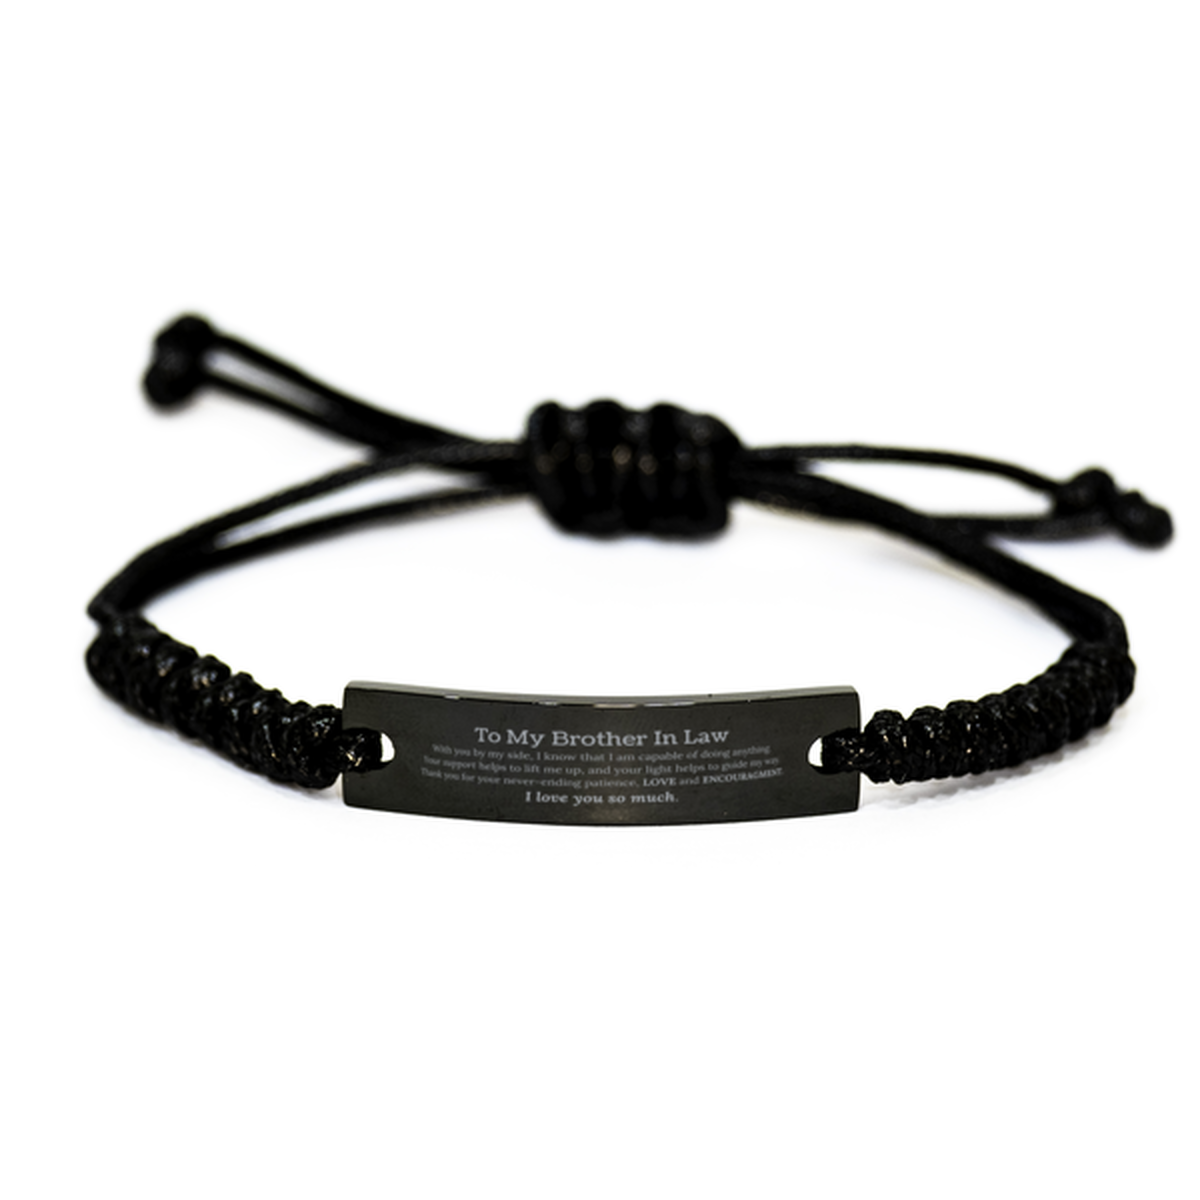 Appreciation Brother In Law Black Rope Bracelet Gifts, To My Brother In Law Birthday Christmas Wedding Keepsake Gifts for Brother In Law With you by my side, I know that I am capable of doing anything. I love you so much